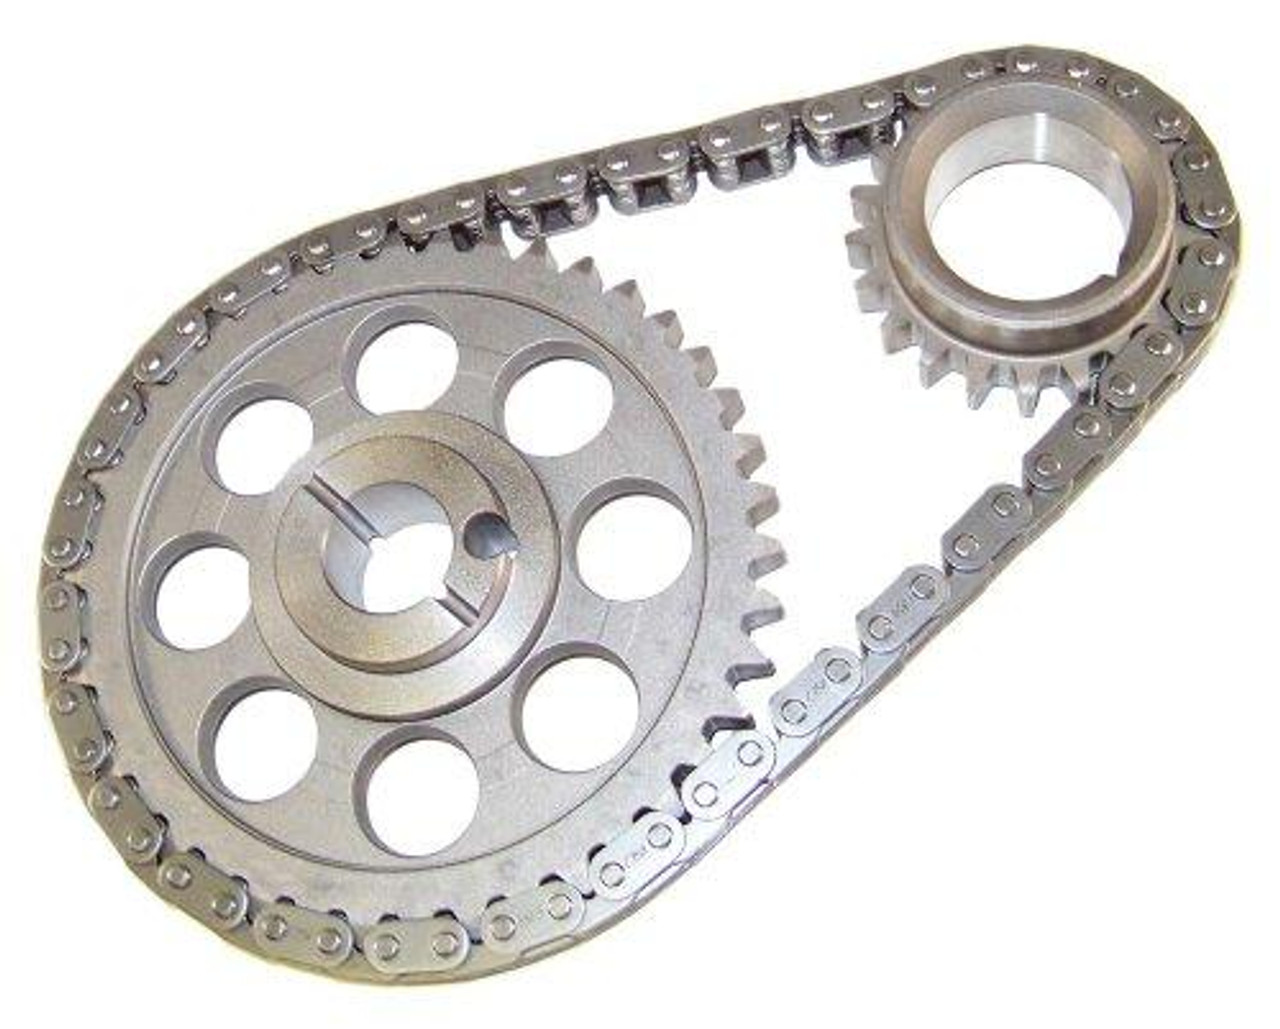 Timing Chain Kit - 1985 Lincoln Continental 5.0L Engine Parts # TK4104ZE25